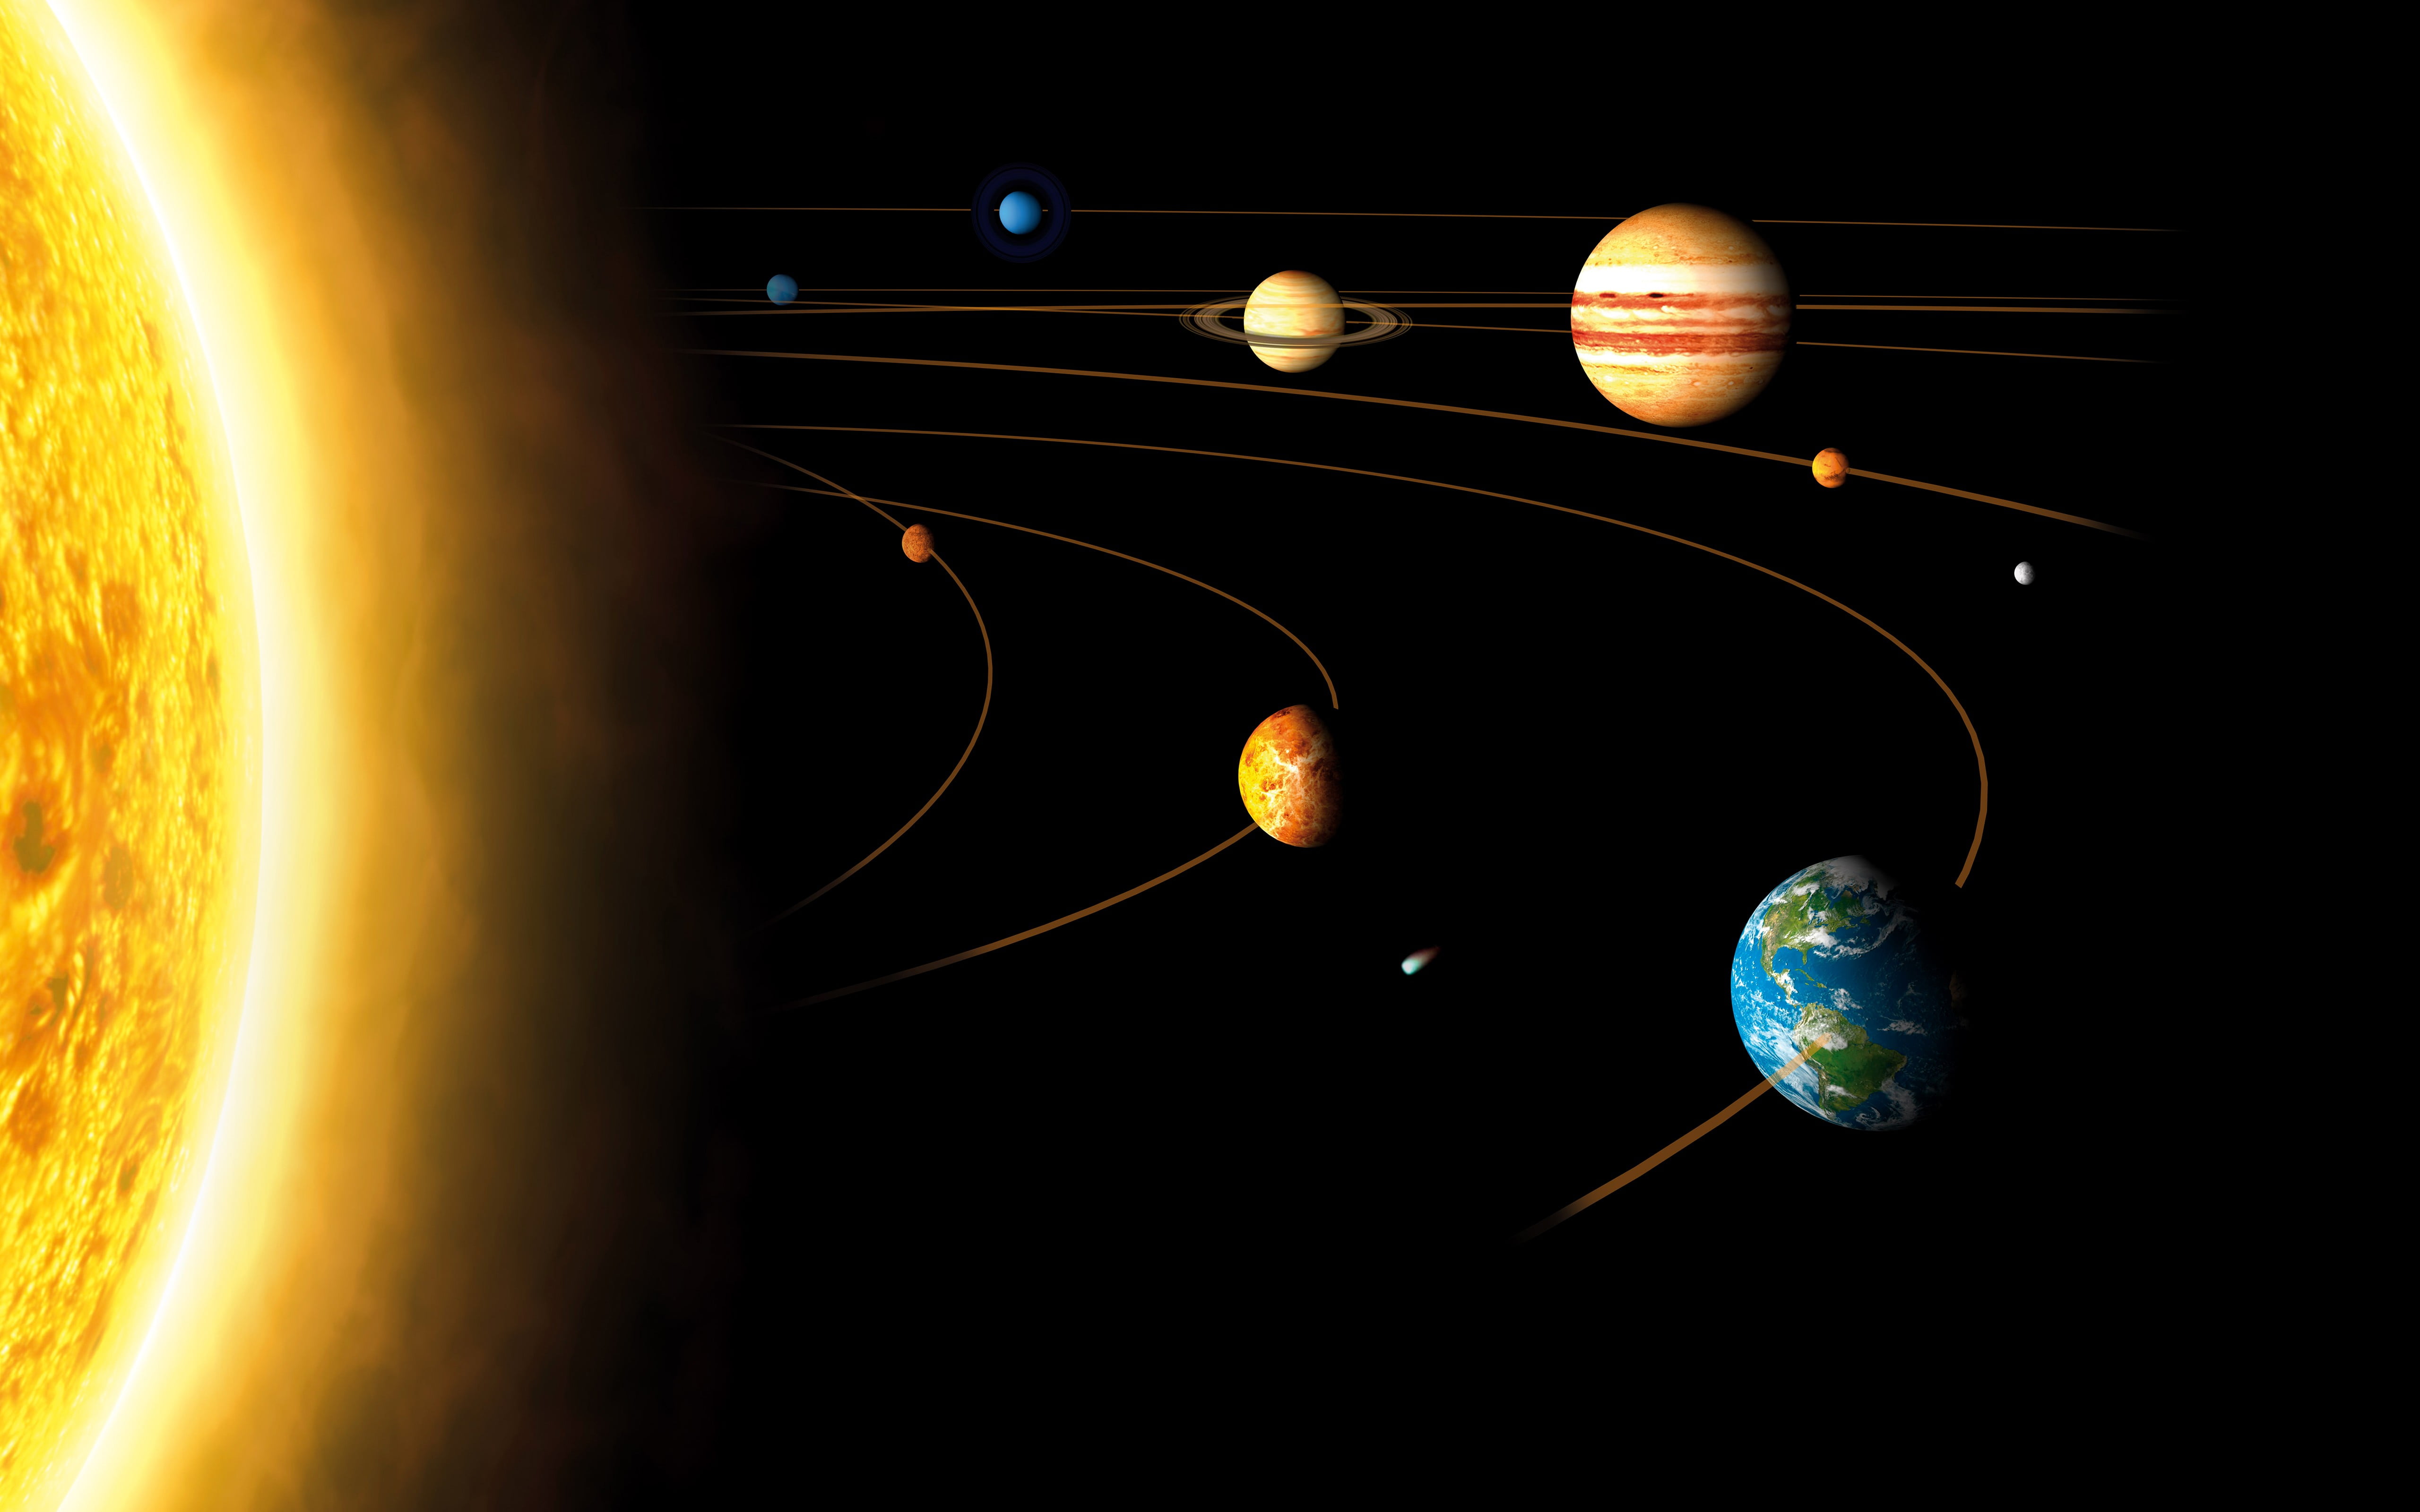 Solar System Planets Wallpaper Hd | Best HQ Wallpapers